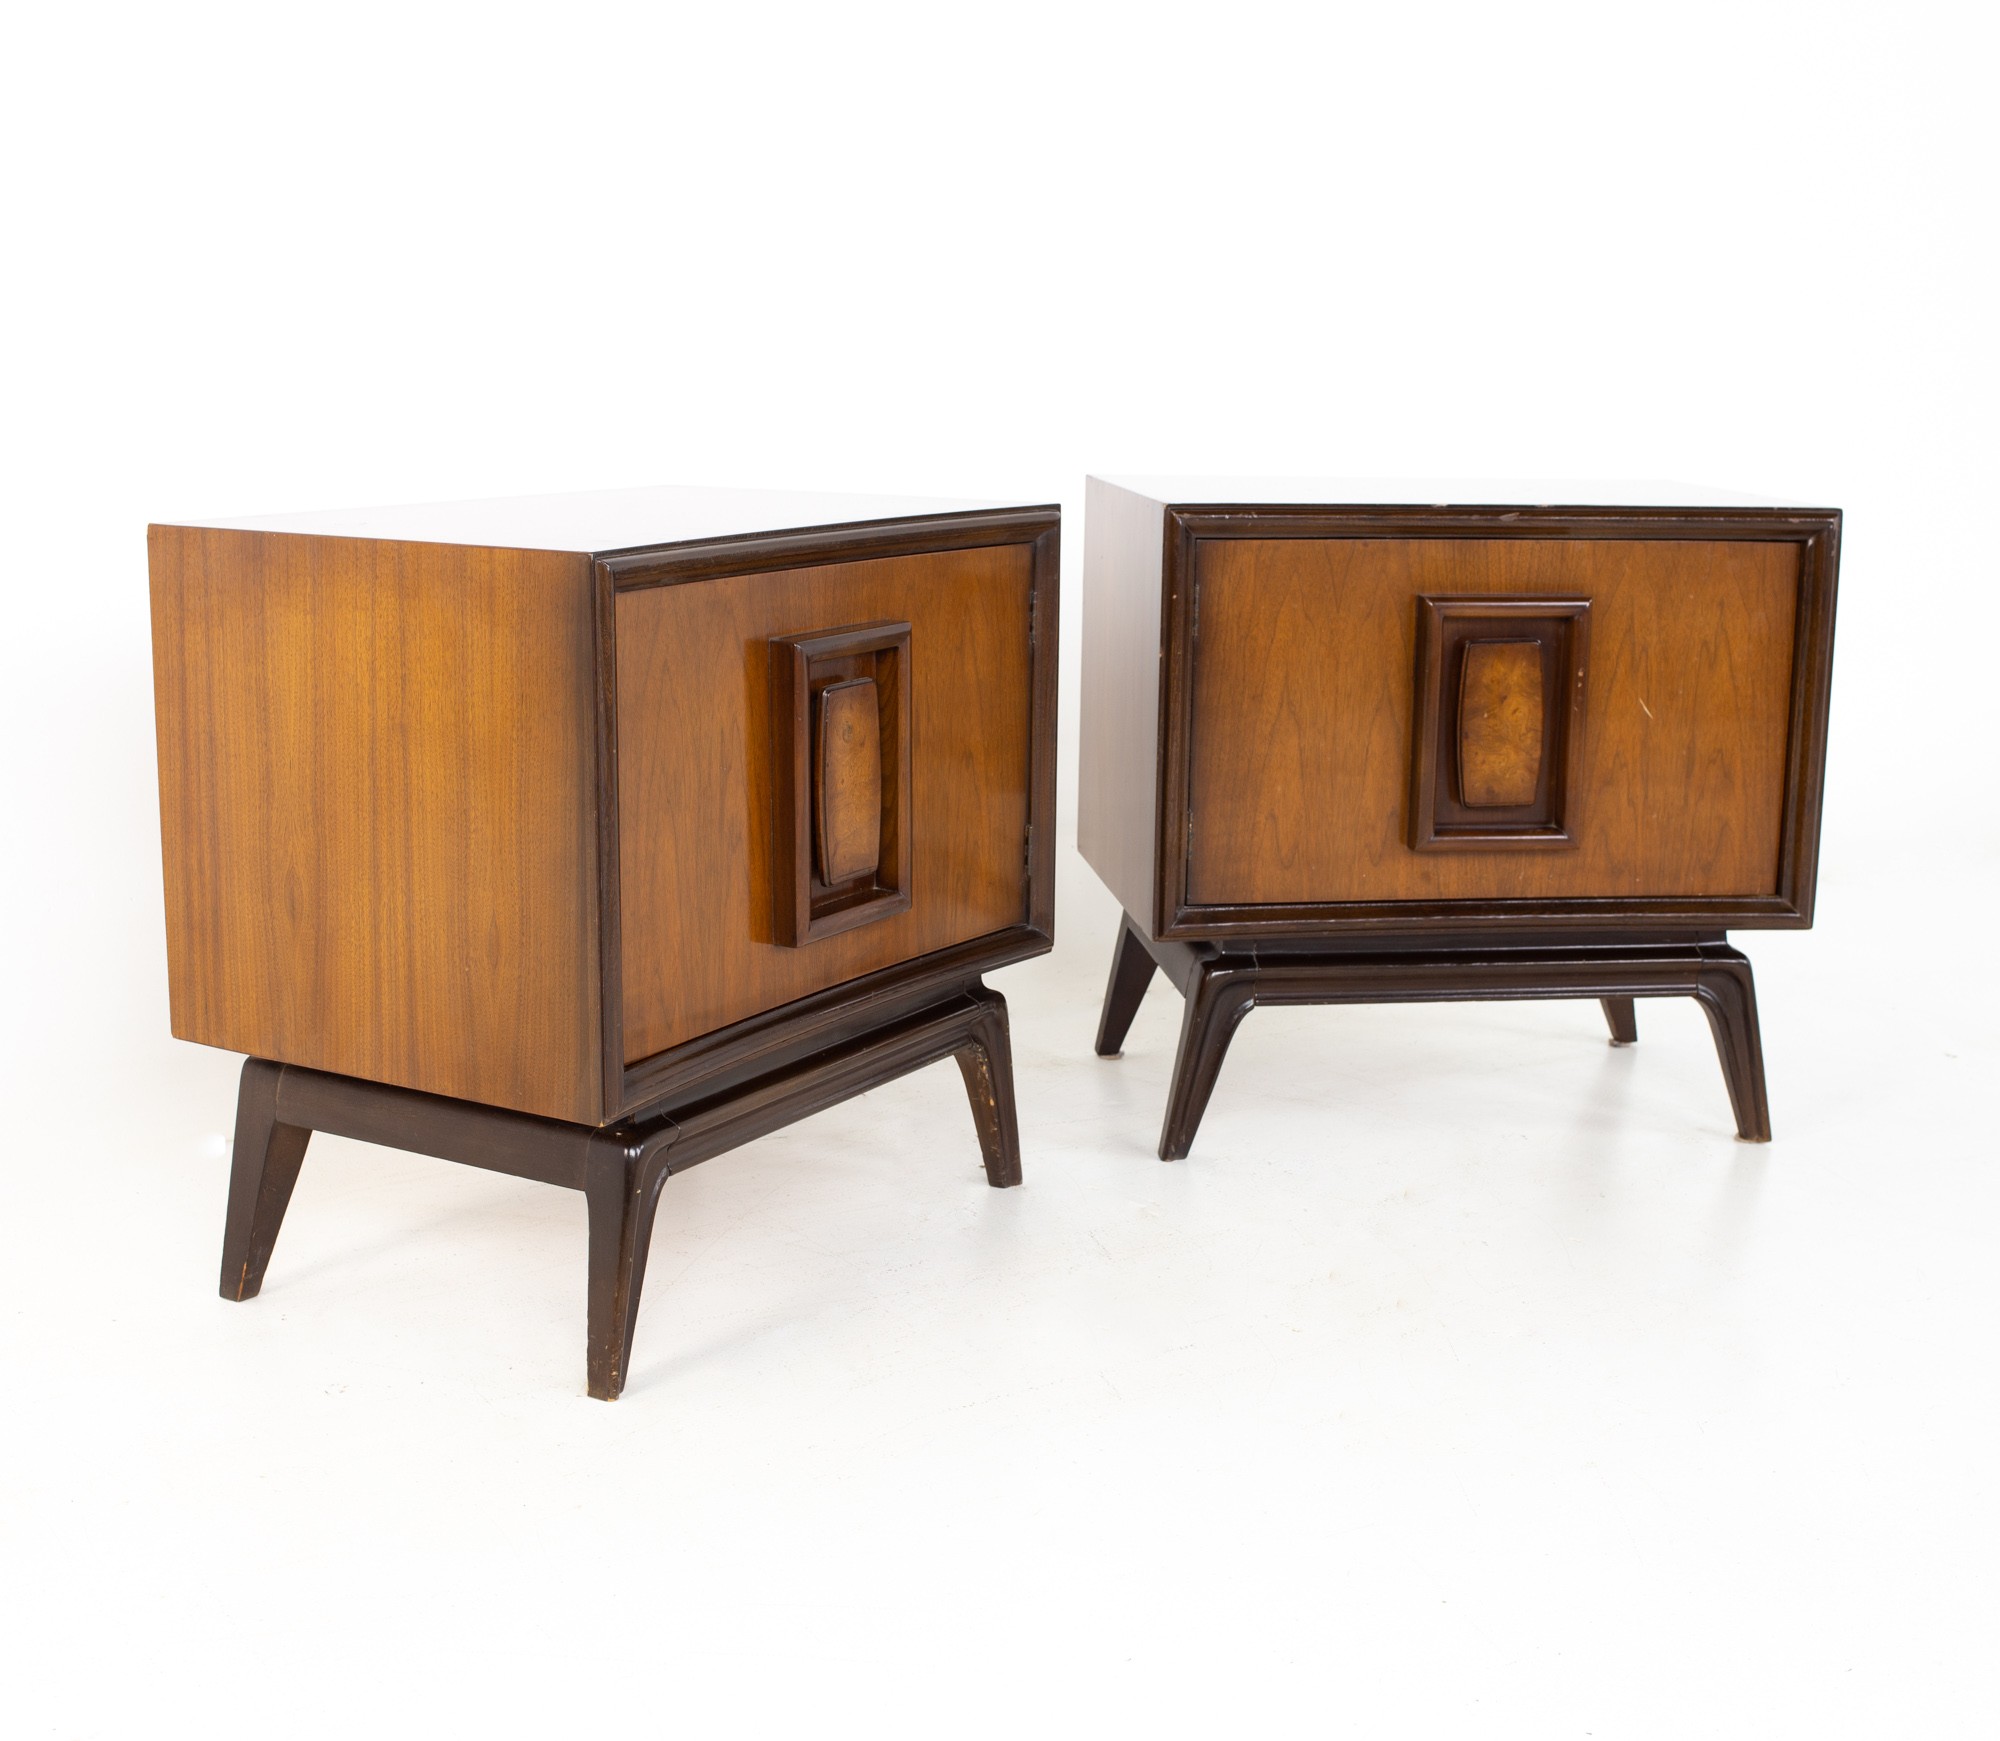 Hoke Wood Products Mid Century Walnut and Burlwood Nightstands - a Pair